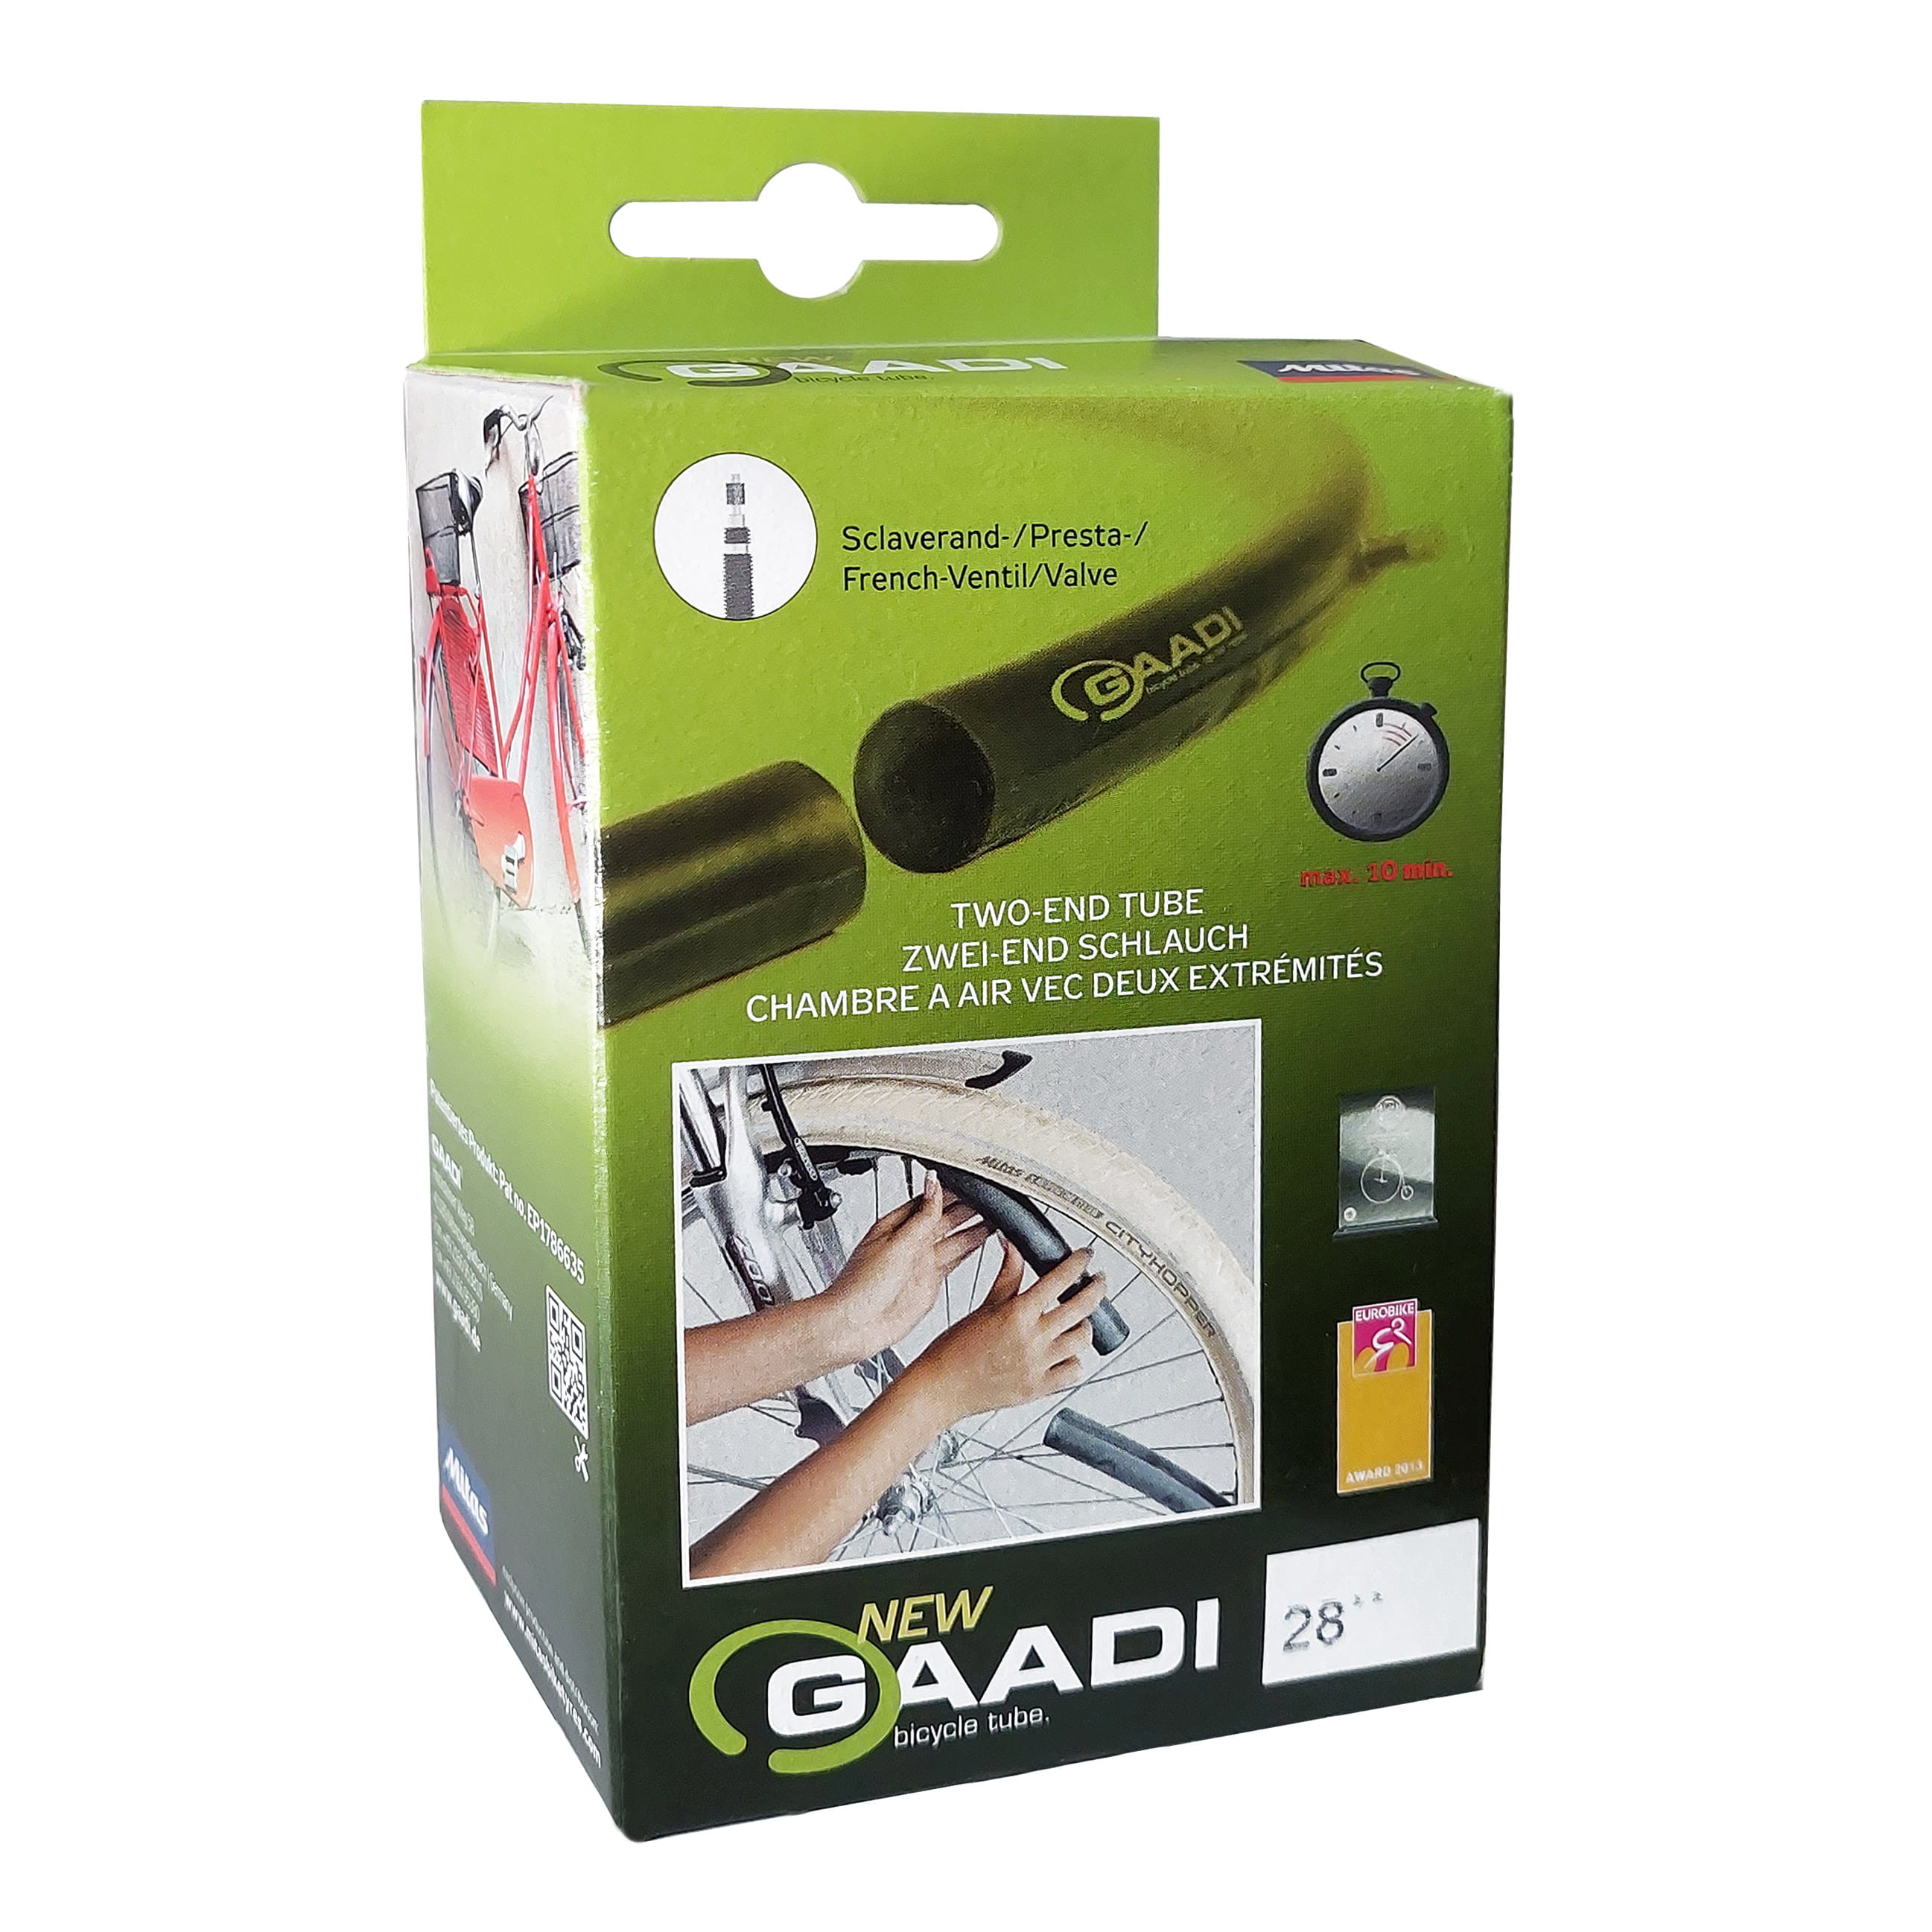 GAADI Open Bicycle Tube with Two Ends